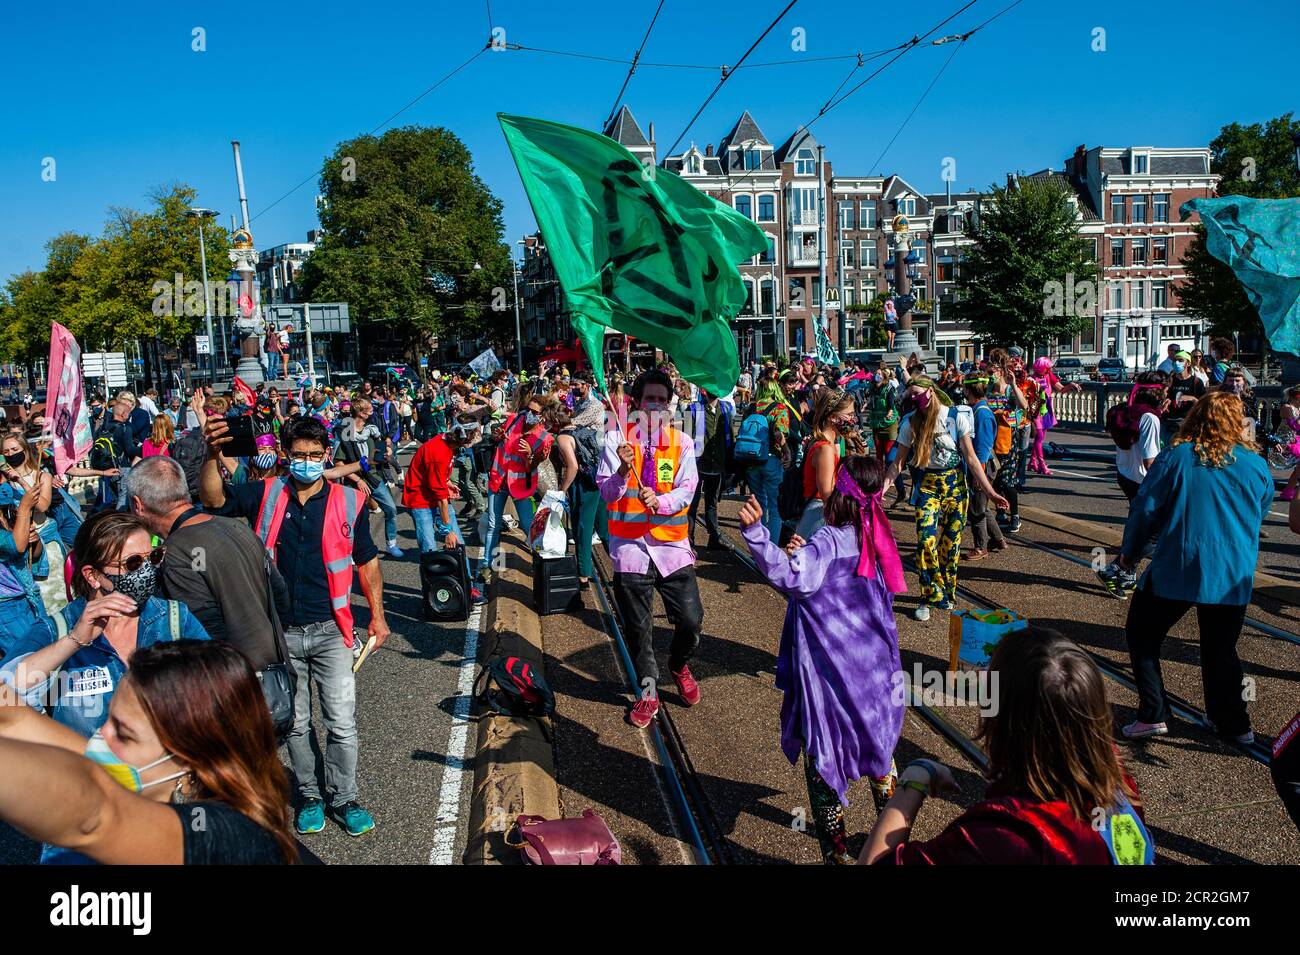 Activists are seen dancing in the middle of the bridge during the rally.During the whole month, the climate activists group Extinction Rebellion in The Netherlands has planned a new campaign called 'September Rebellion' to draw attention to the climate and ecological crisis. At the Museumplein, in Amsterdam, hundreds of XR activists danced to demand action against climate change in what protesters dubbed “civil disco-bedience”. Activists waved flags and danced to songs including the Bee Gees’ 1977 hit, Stayin’ Alive. After the Museumplein the activists blocked for a few minutes one of the most Stock Photo